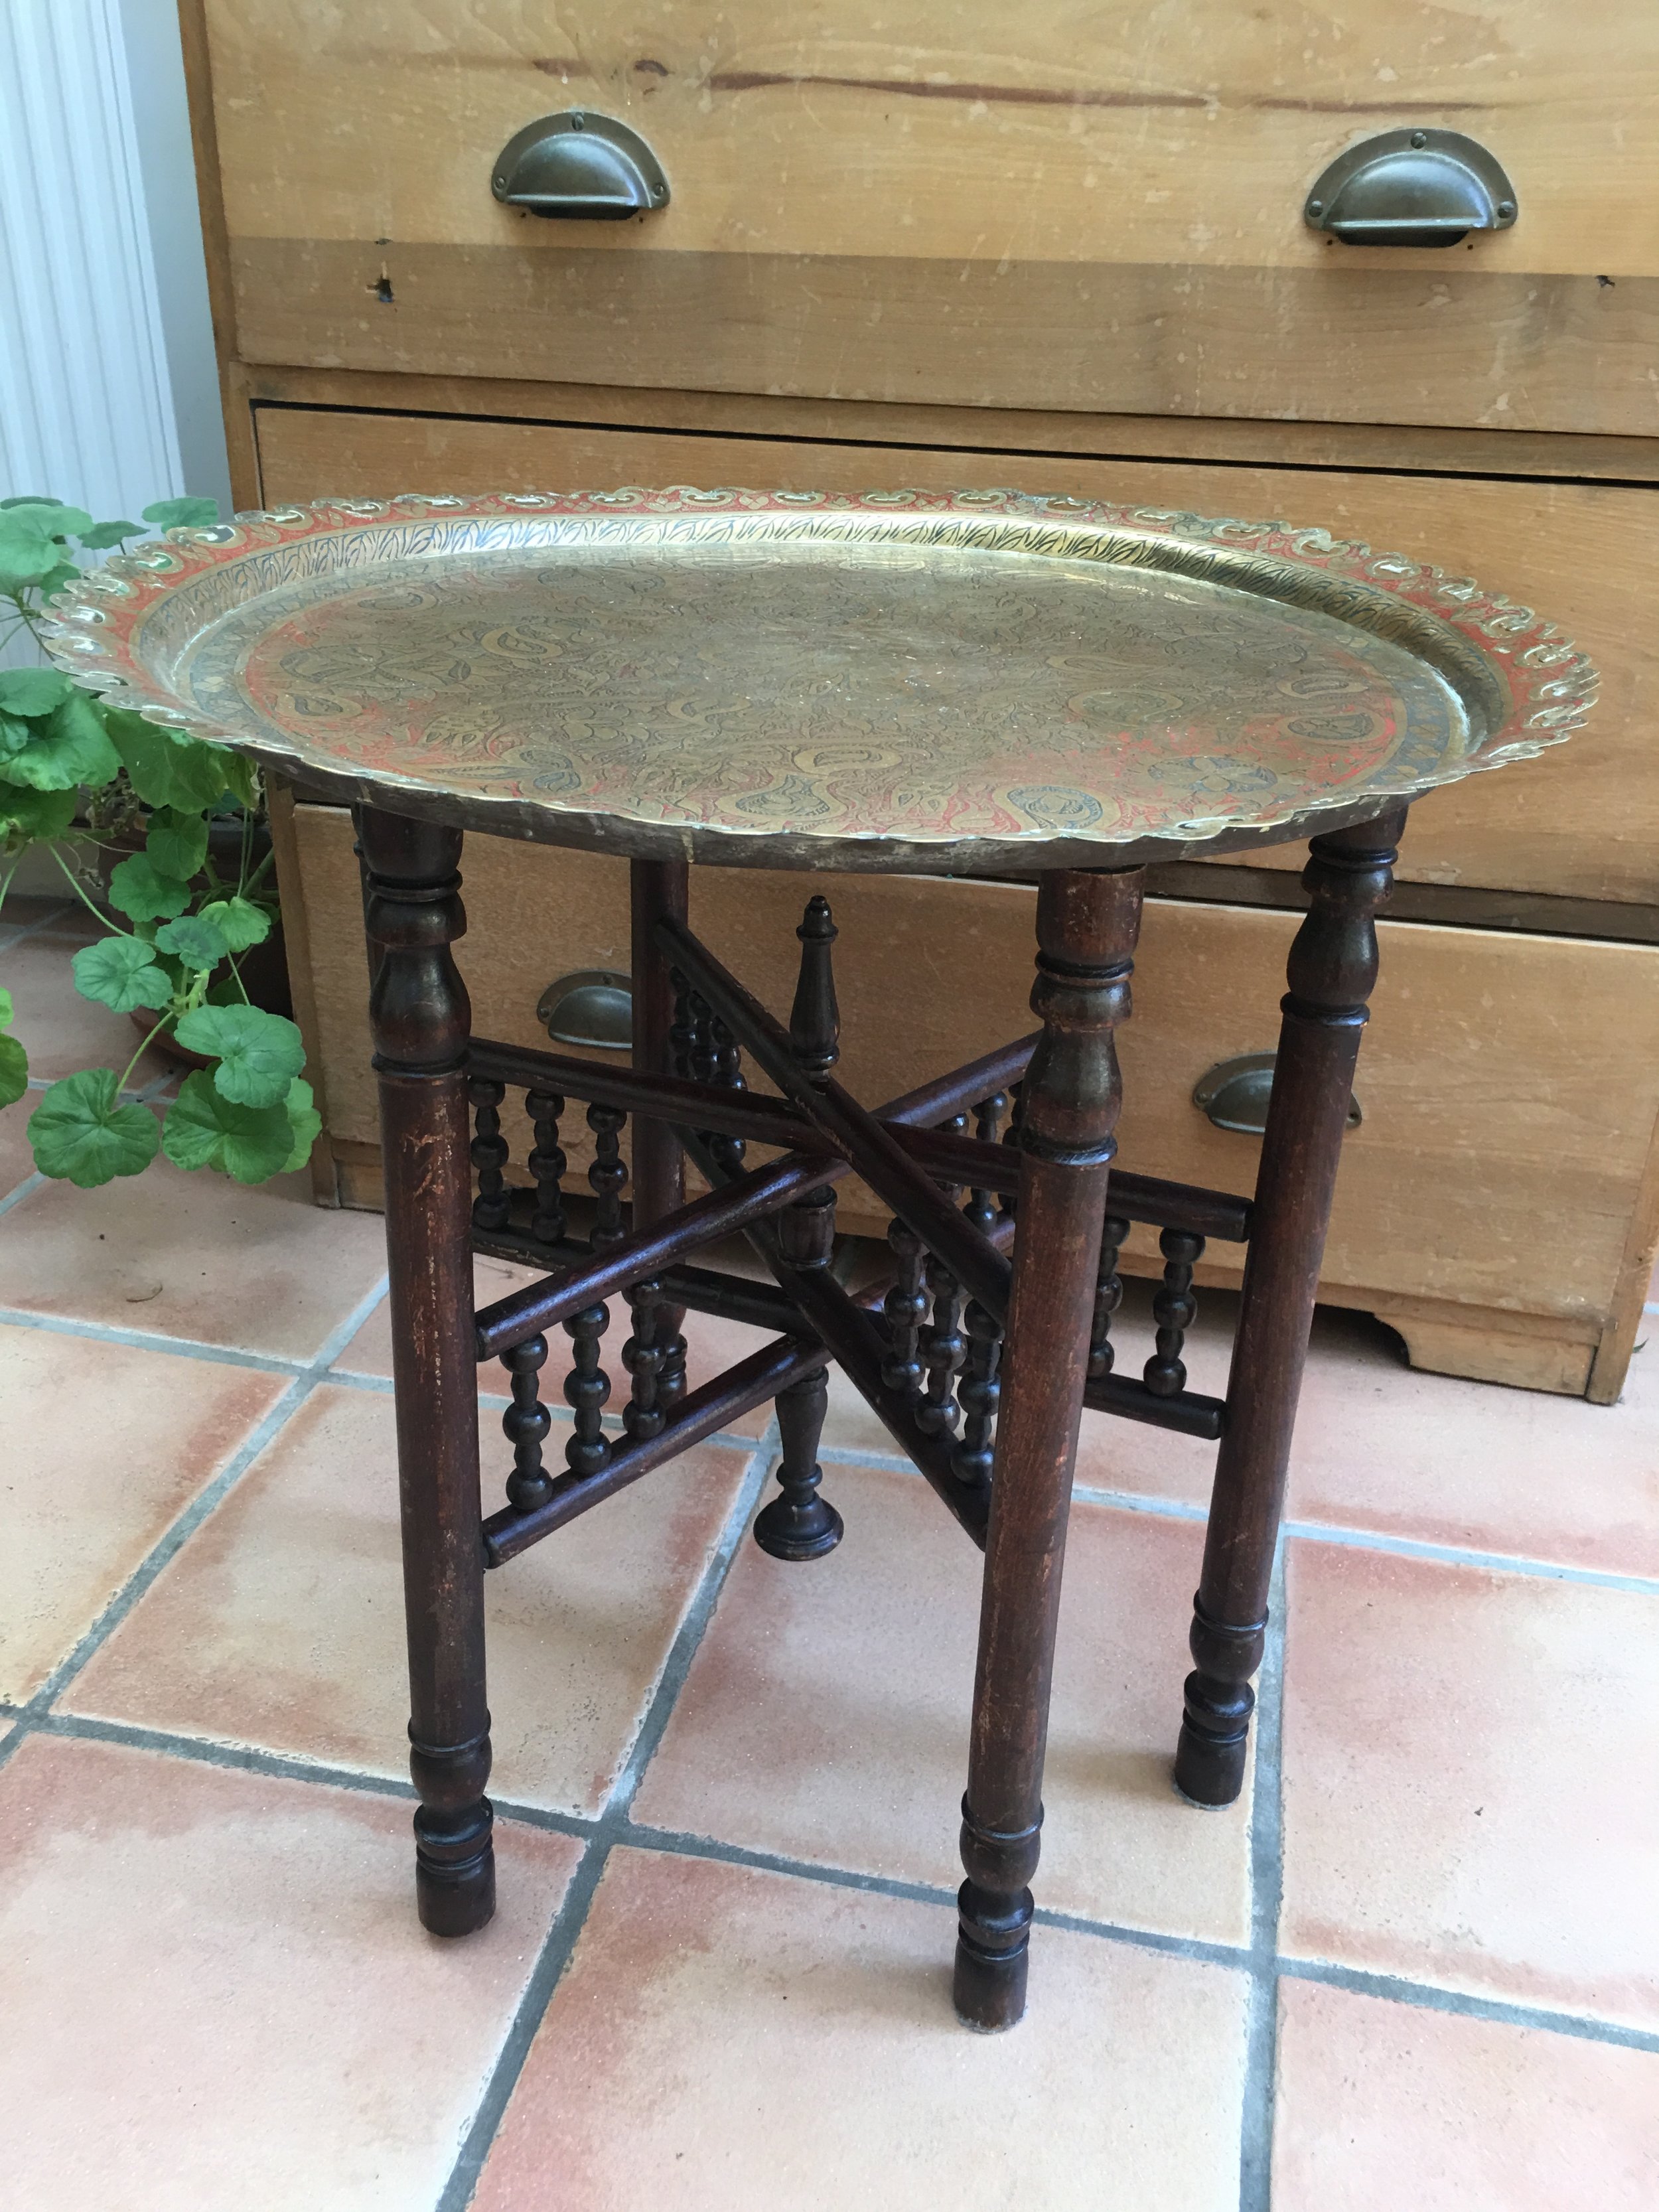 Moroccan Brass Table £15